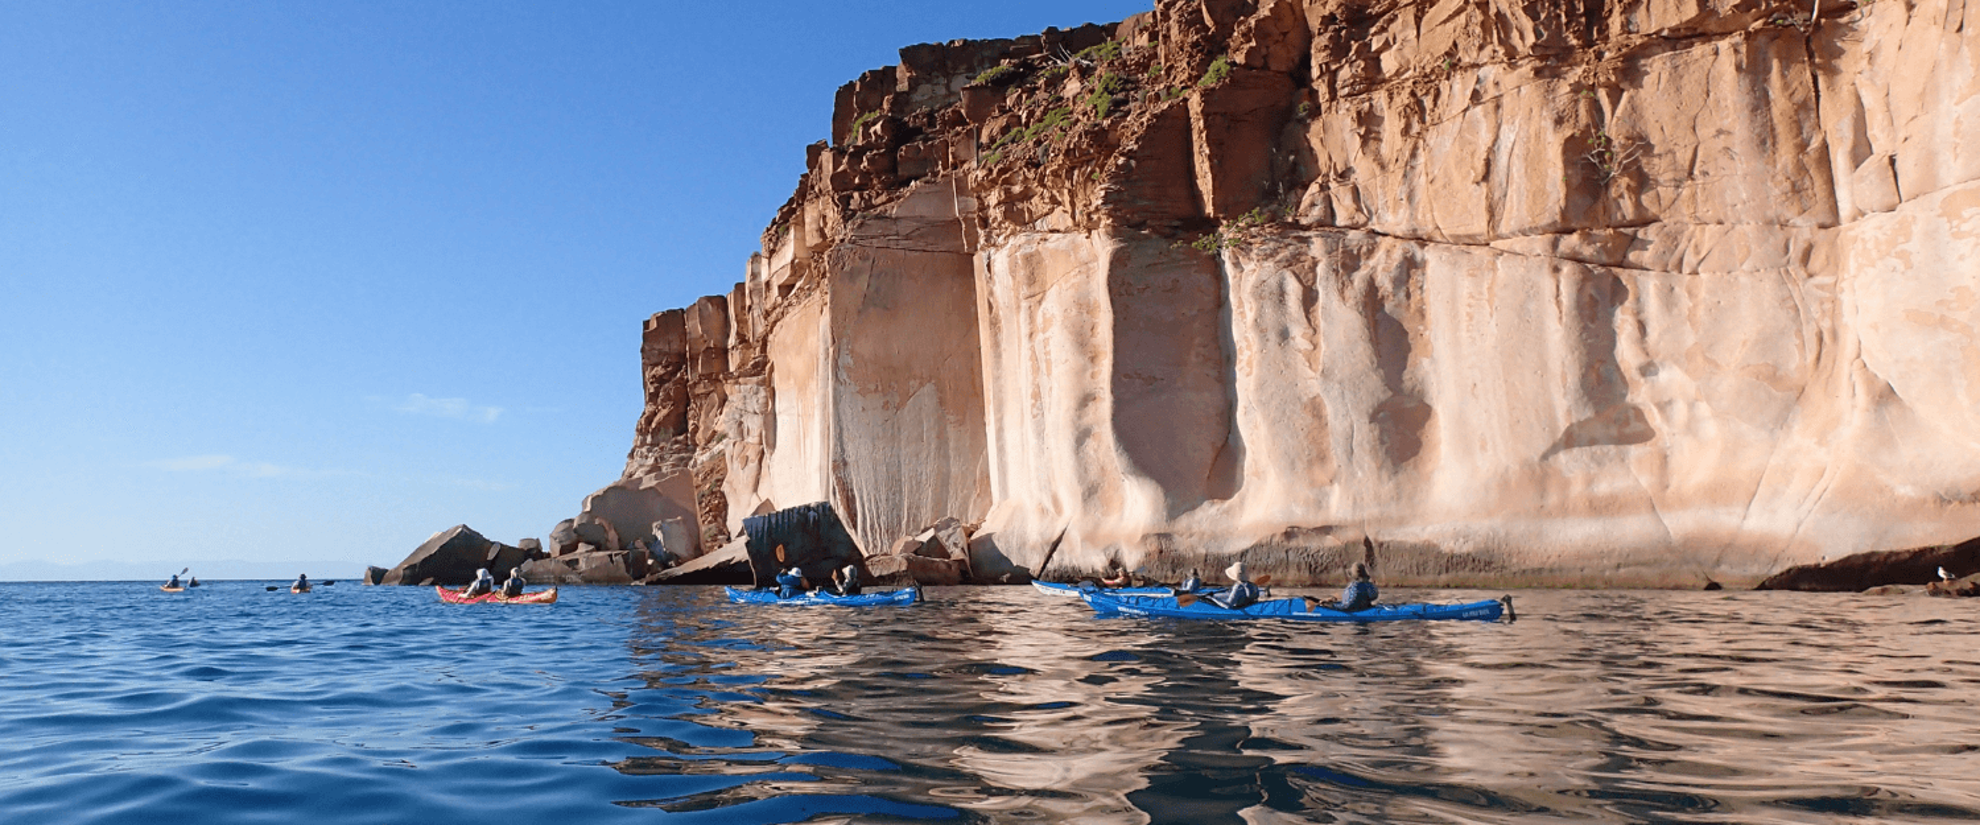 Camping on the Sea Of Cortez | Snorkeling, Boating, Wildlife, Hiking, Stand Up Paddle-boarding, Kayaking in Mexico